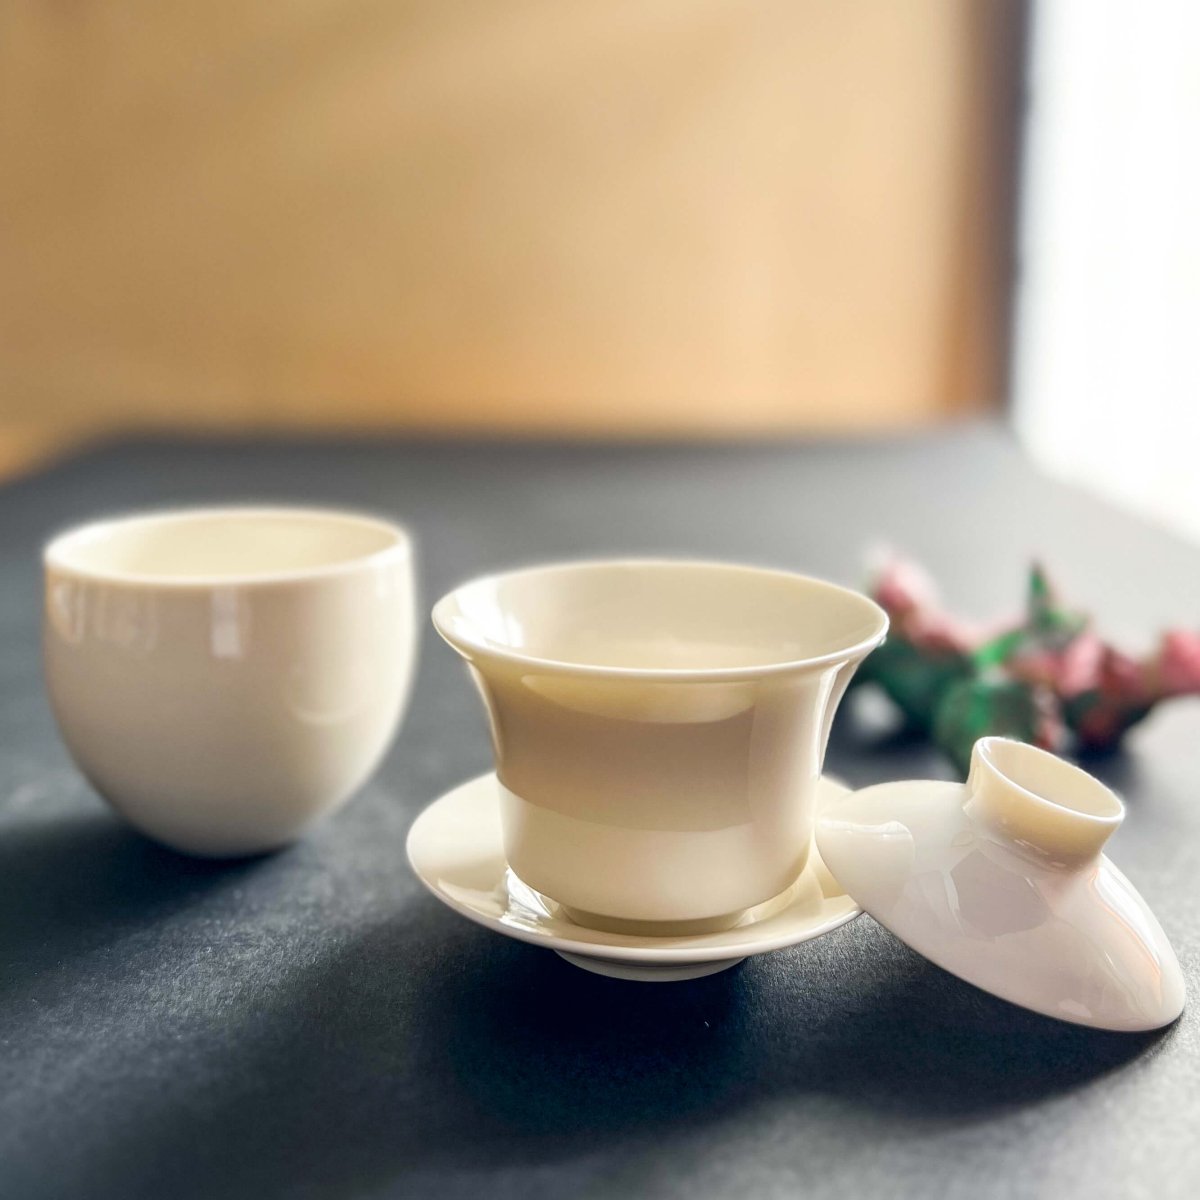 Porcelain Gaiwan and Cup Starter Set